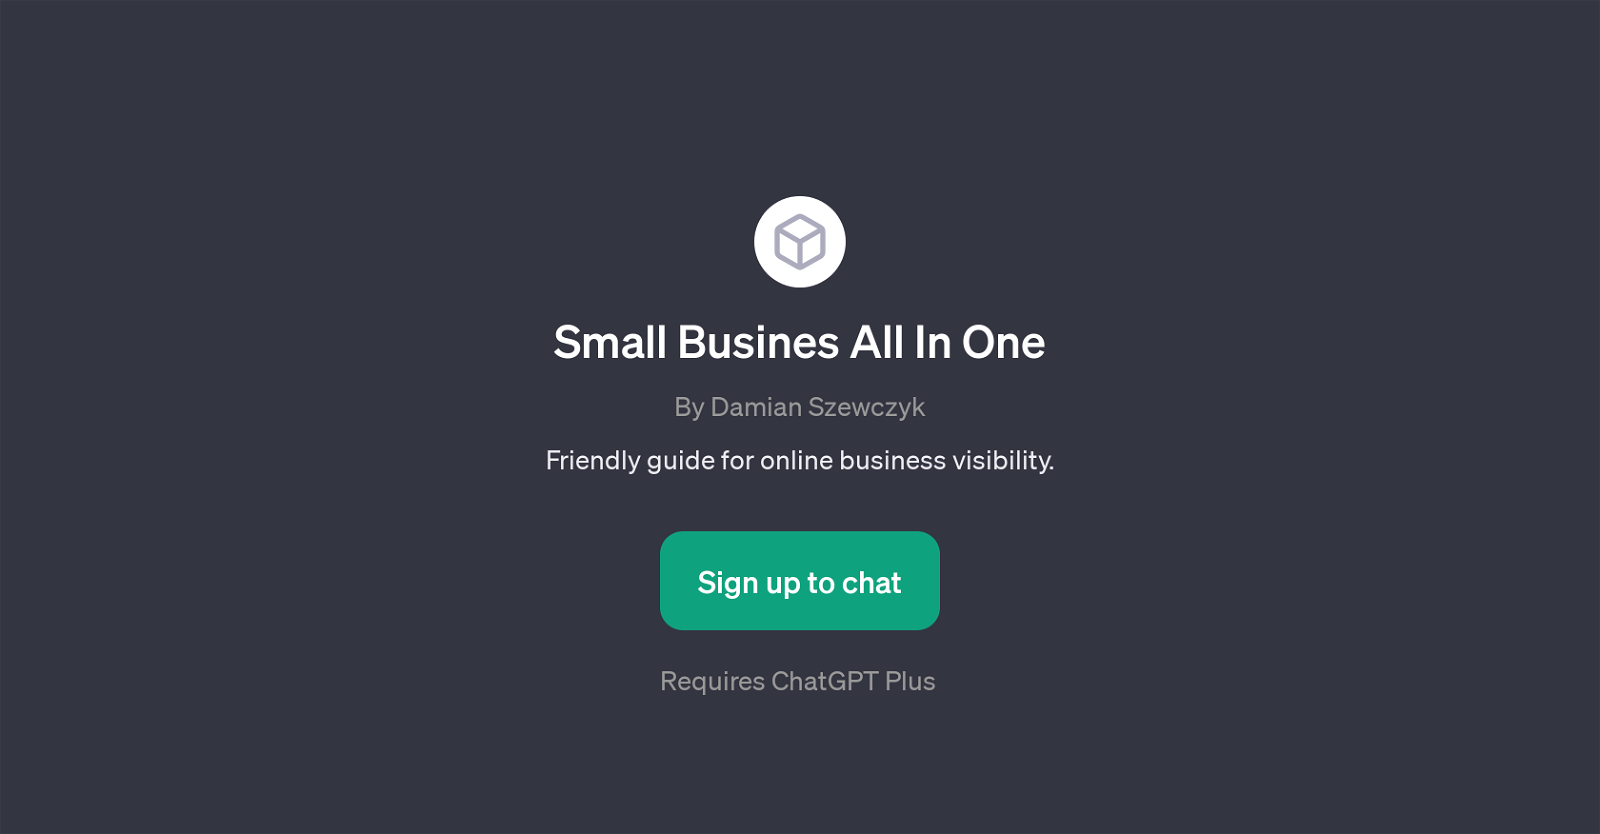 Small Busines All In One website